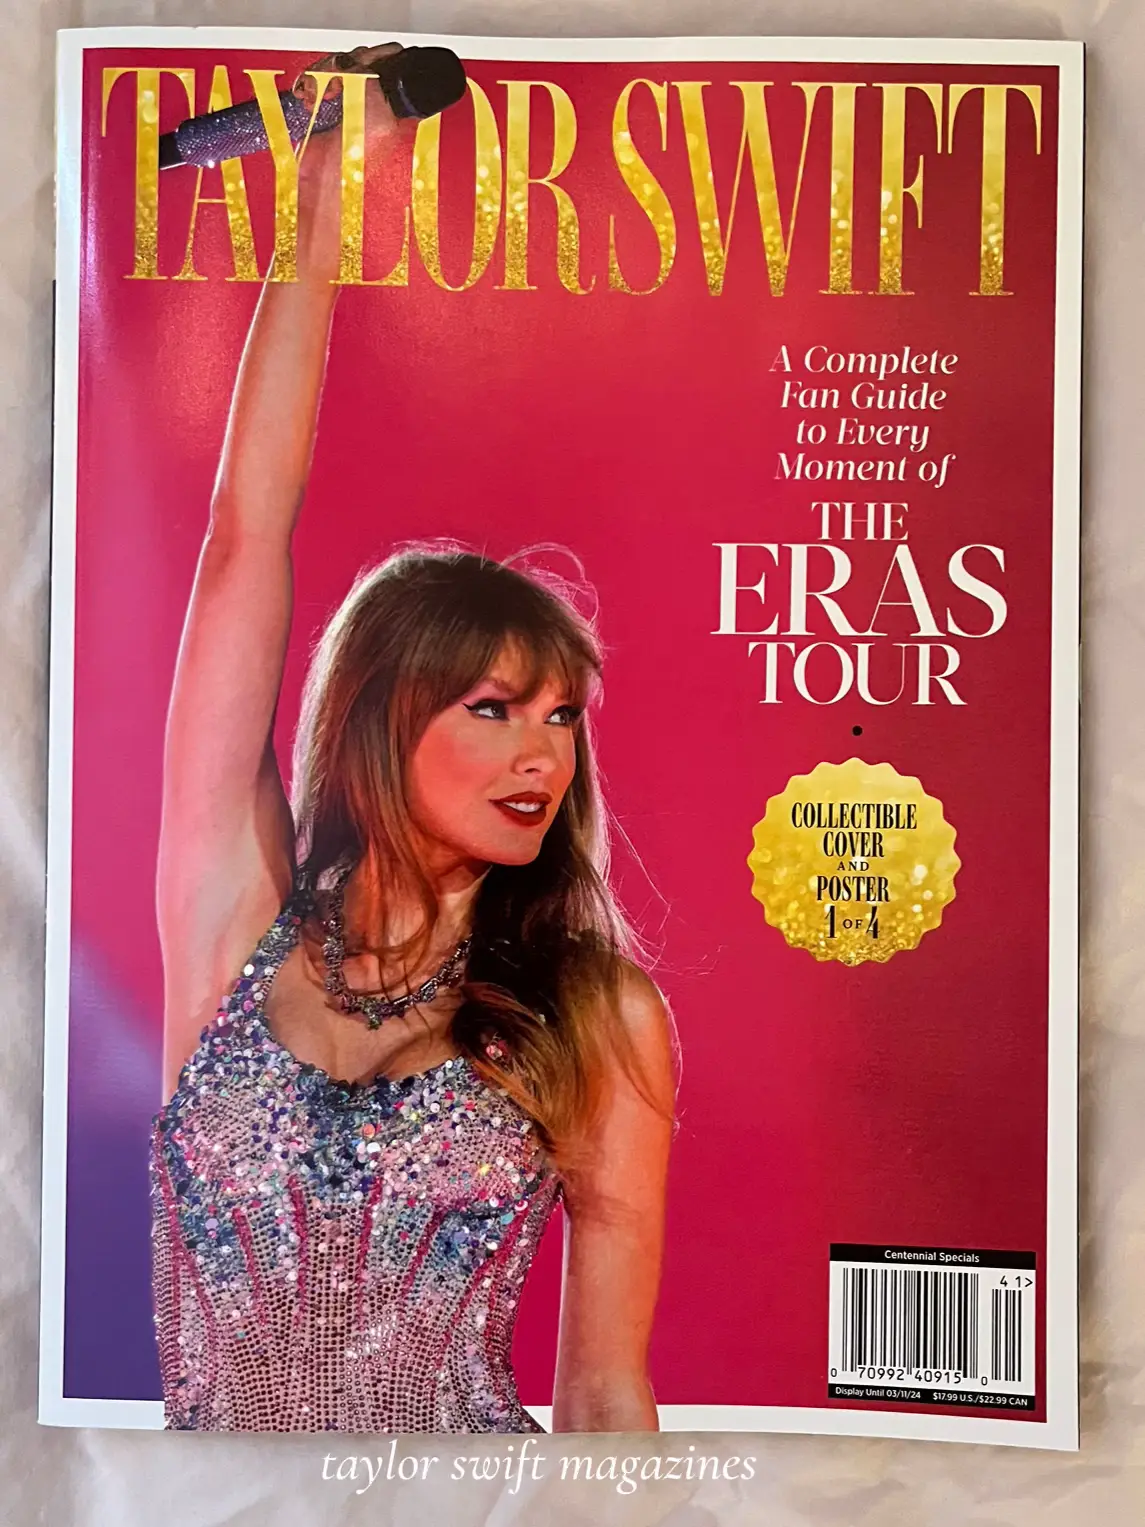 Taylor Swift Poster Music Album Cover Collage Poster Print Canvas Wall Art  Fearless, Speak Now, Red,1989, Reputation, Lover, Midnights,Folklore,  Evermore Cover(…